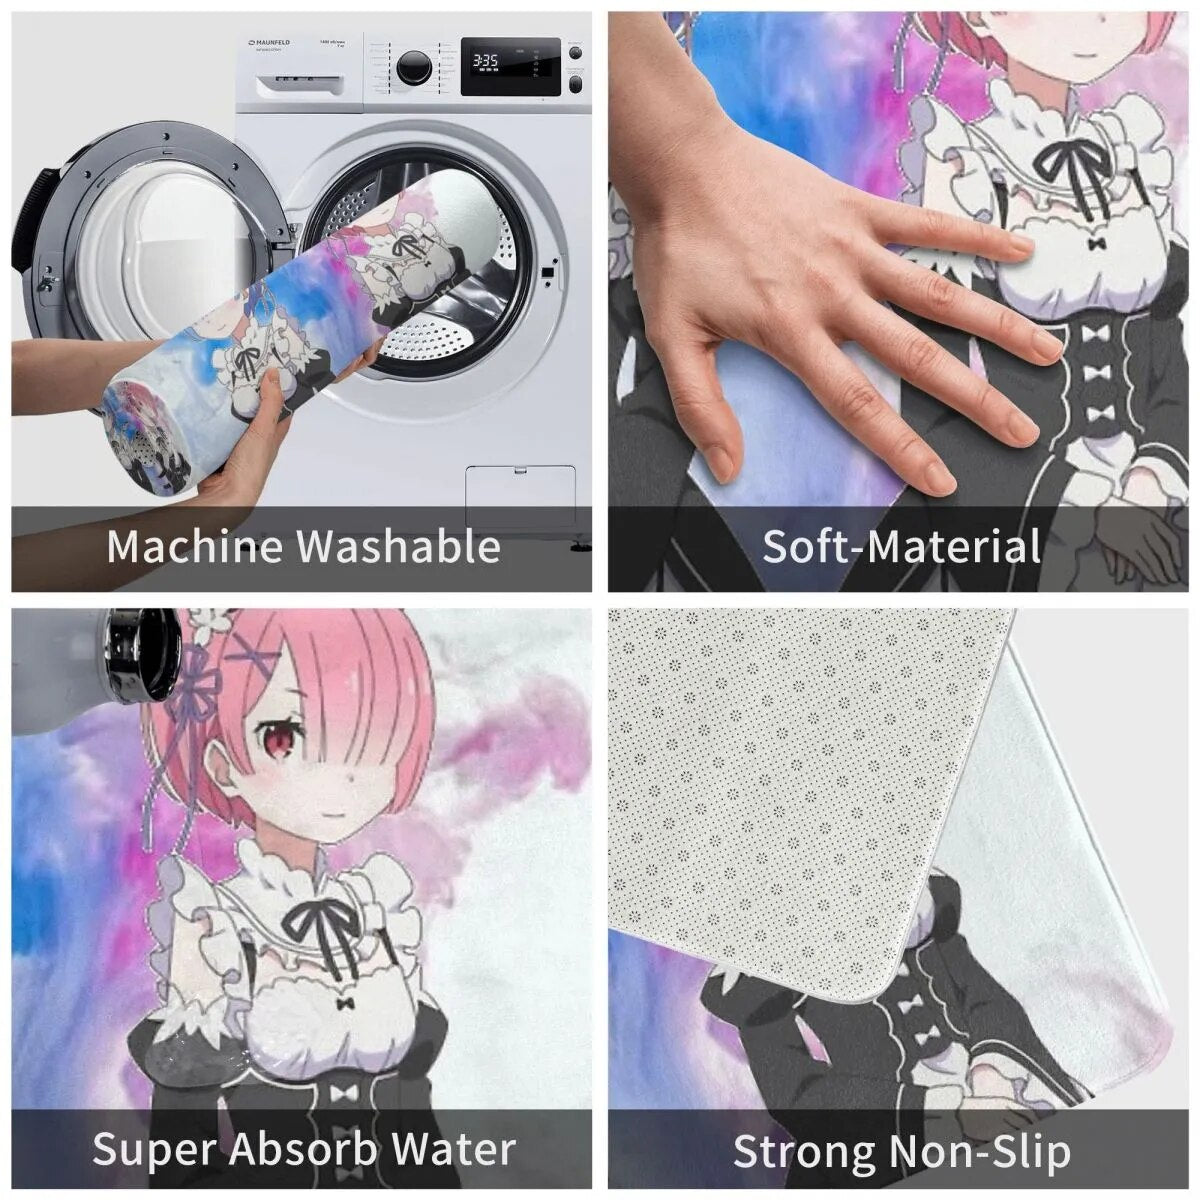 The mat showcases a vivid depiction of Rem & Ram set against a dreamy, captures their iconic styles.  If you are looking for more Re Zero Merch, We have it all! | Check out all our Anime Merch now!